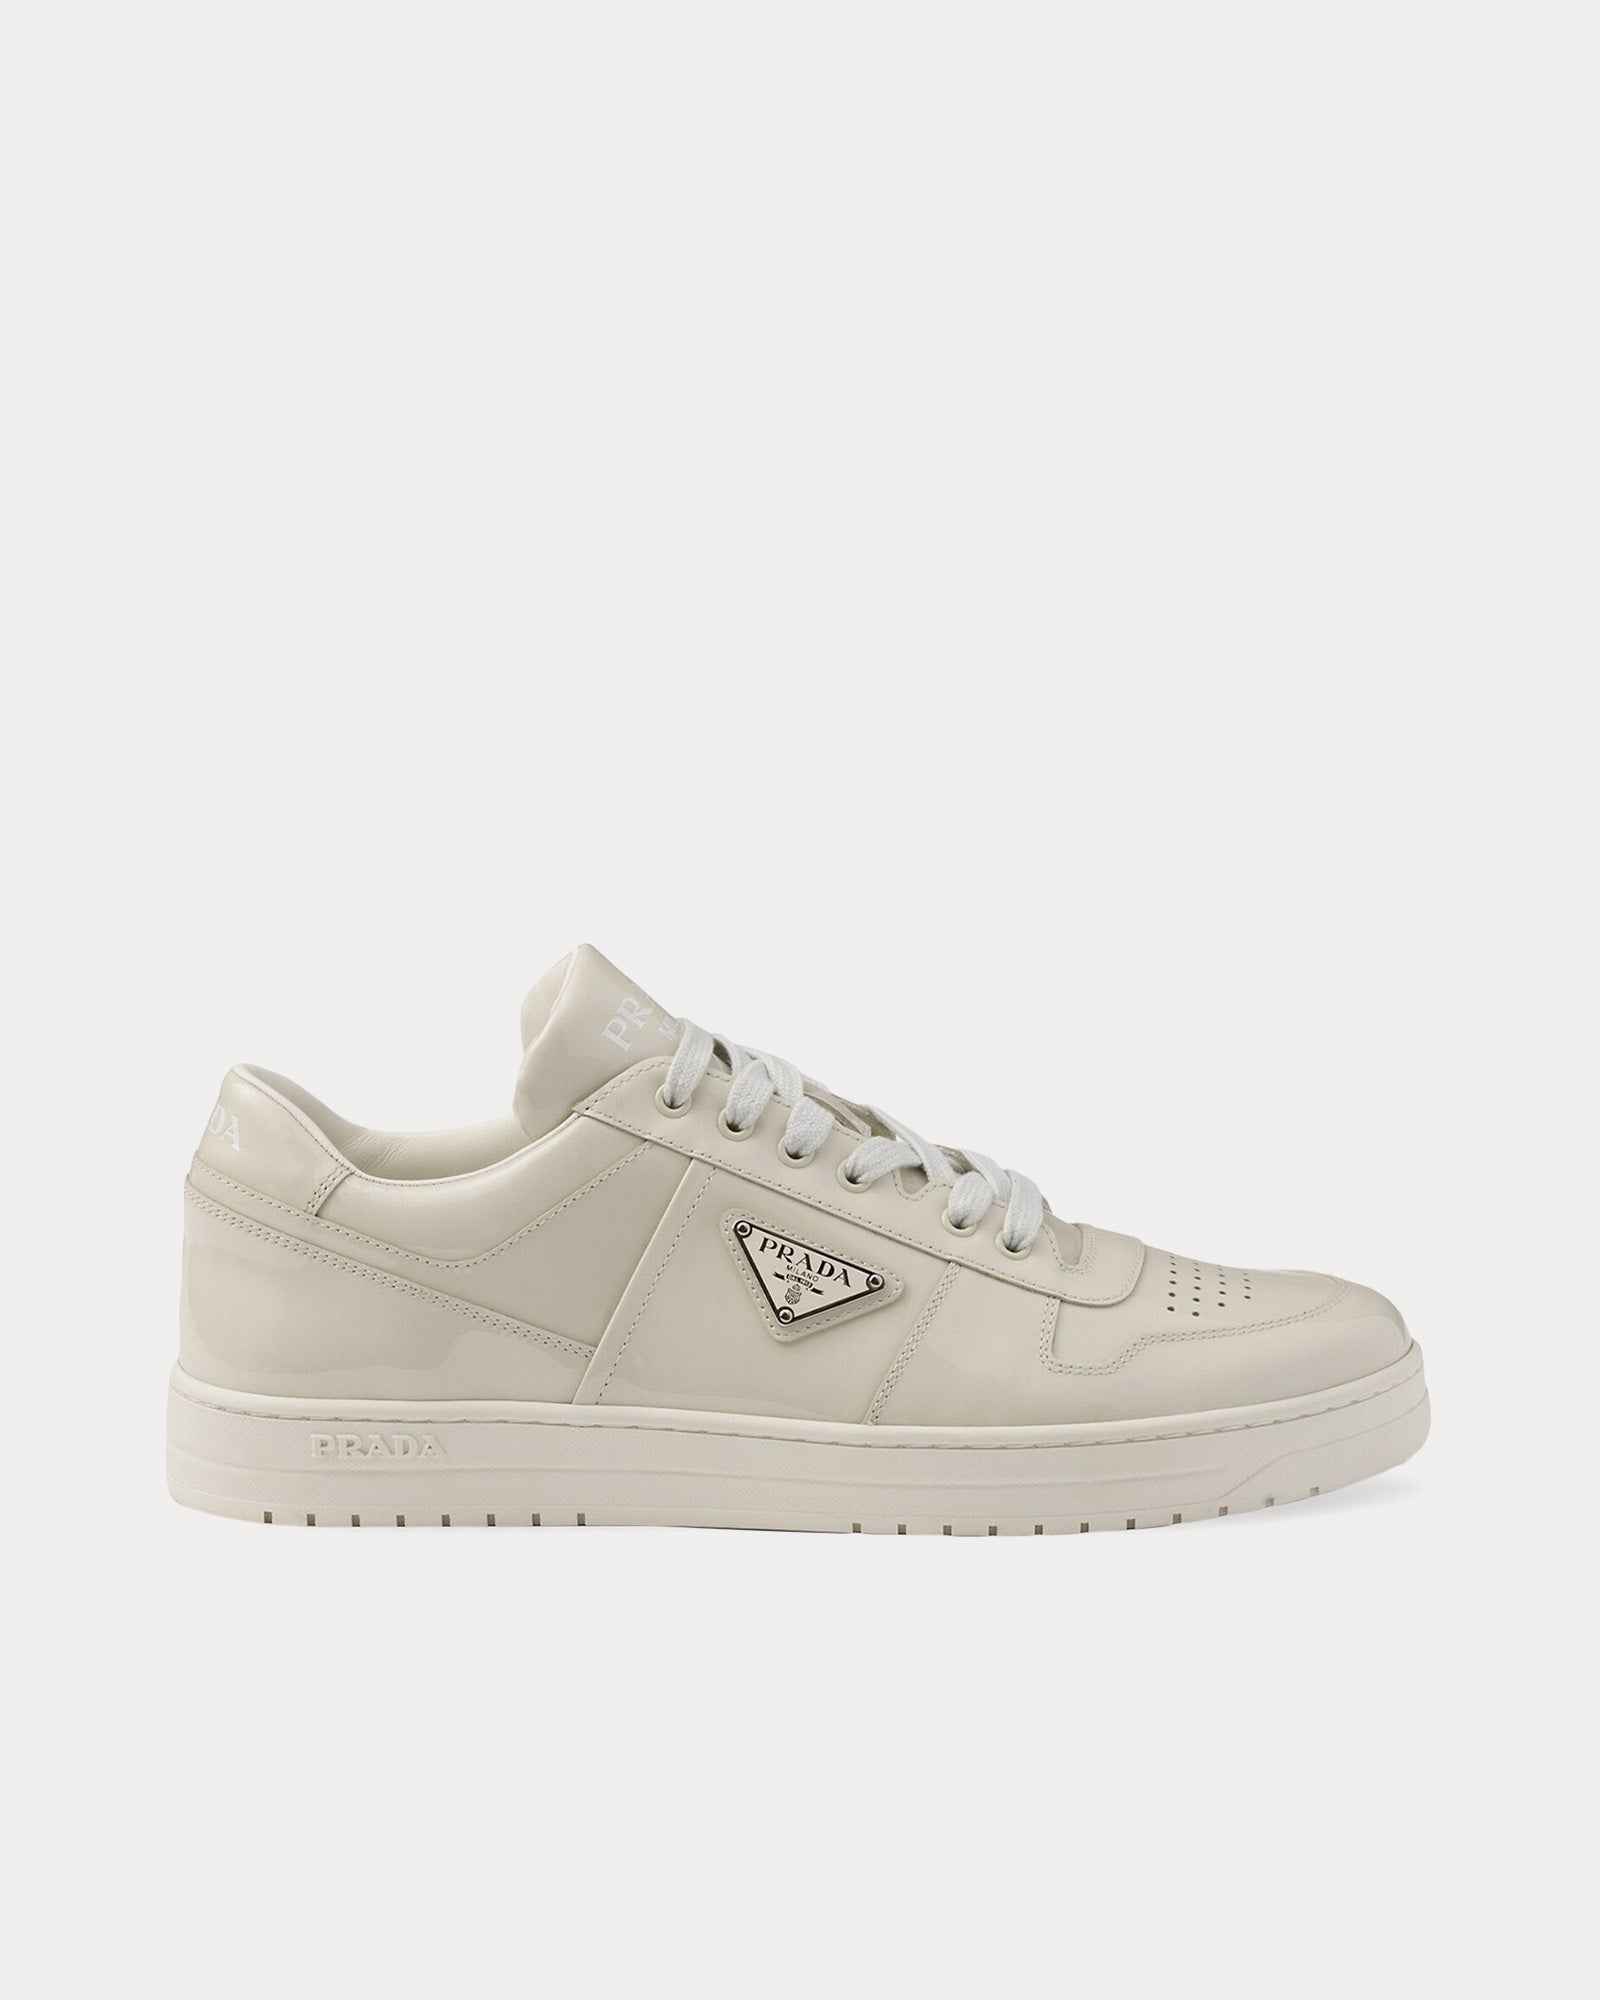 Prada - Downtown Patent Leather Alabaster Low Top Sneakers